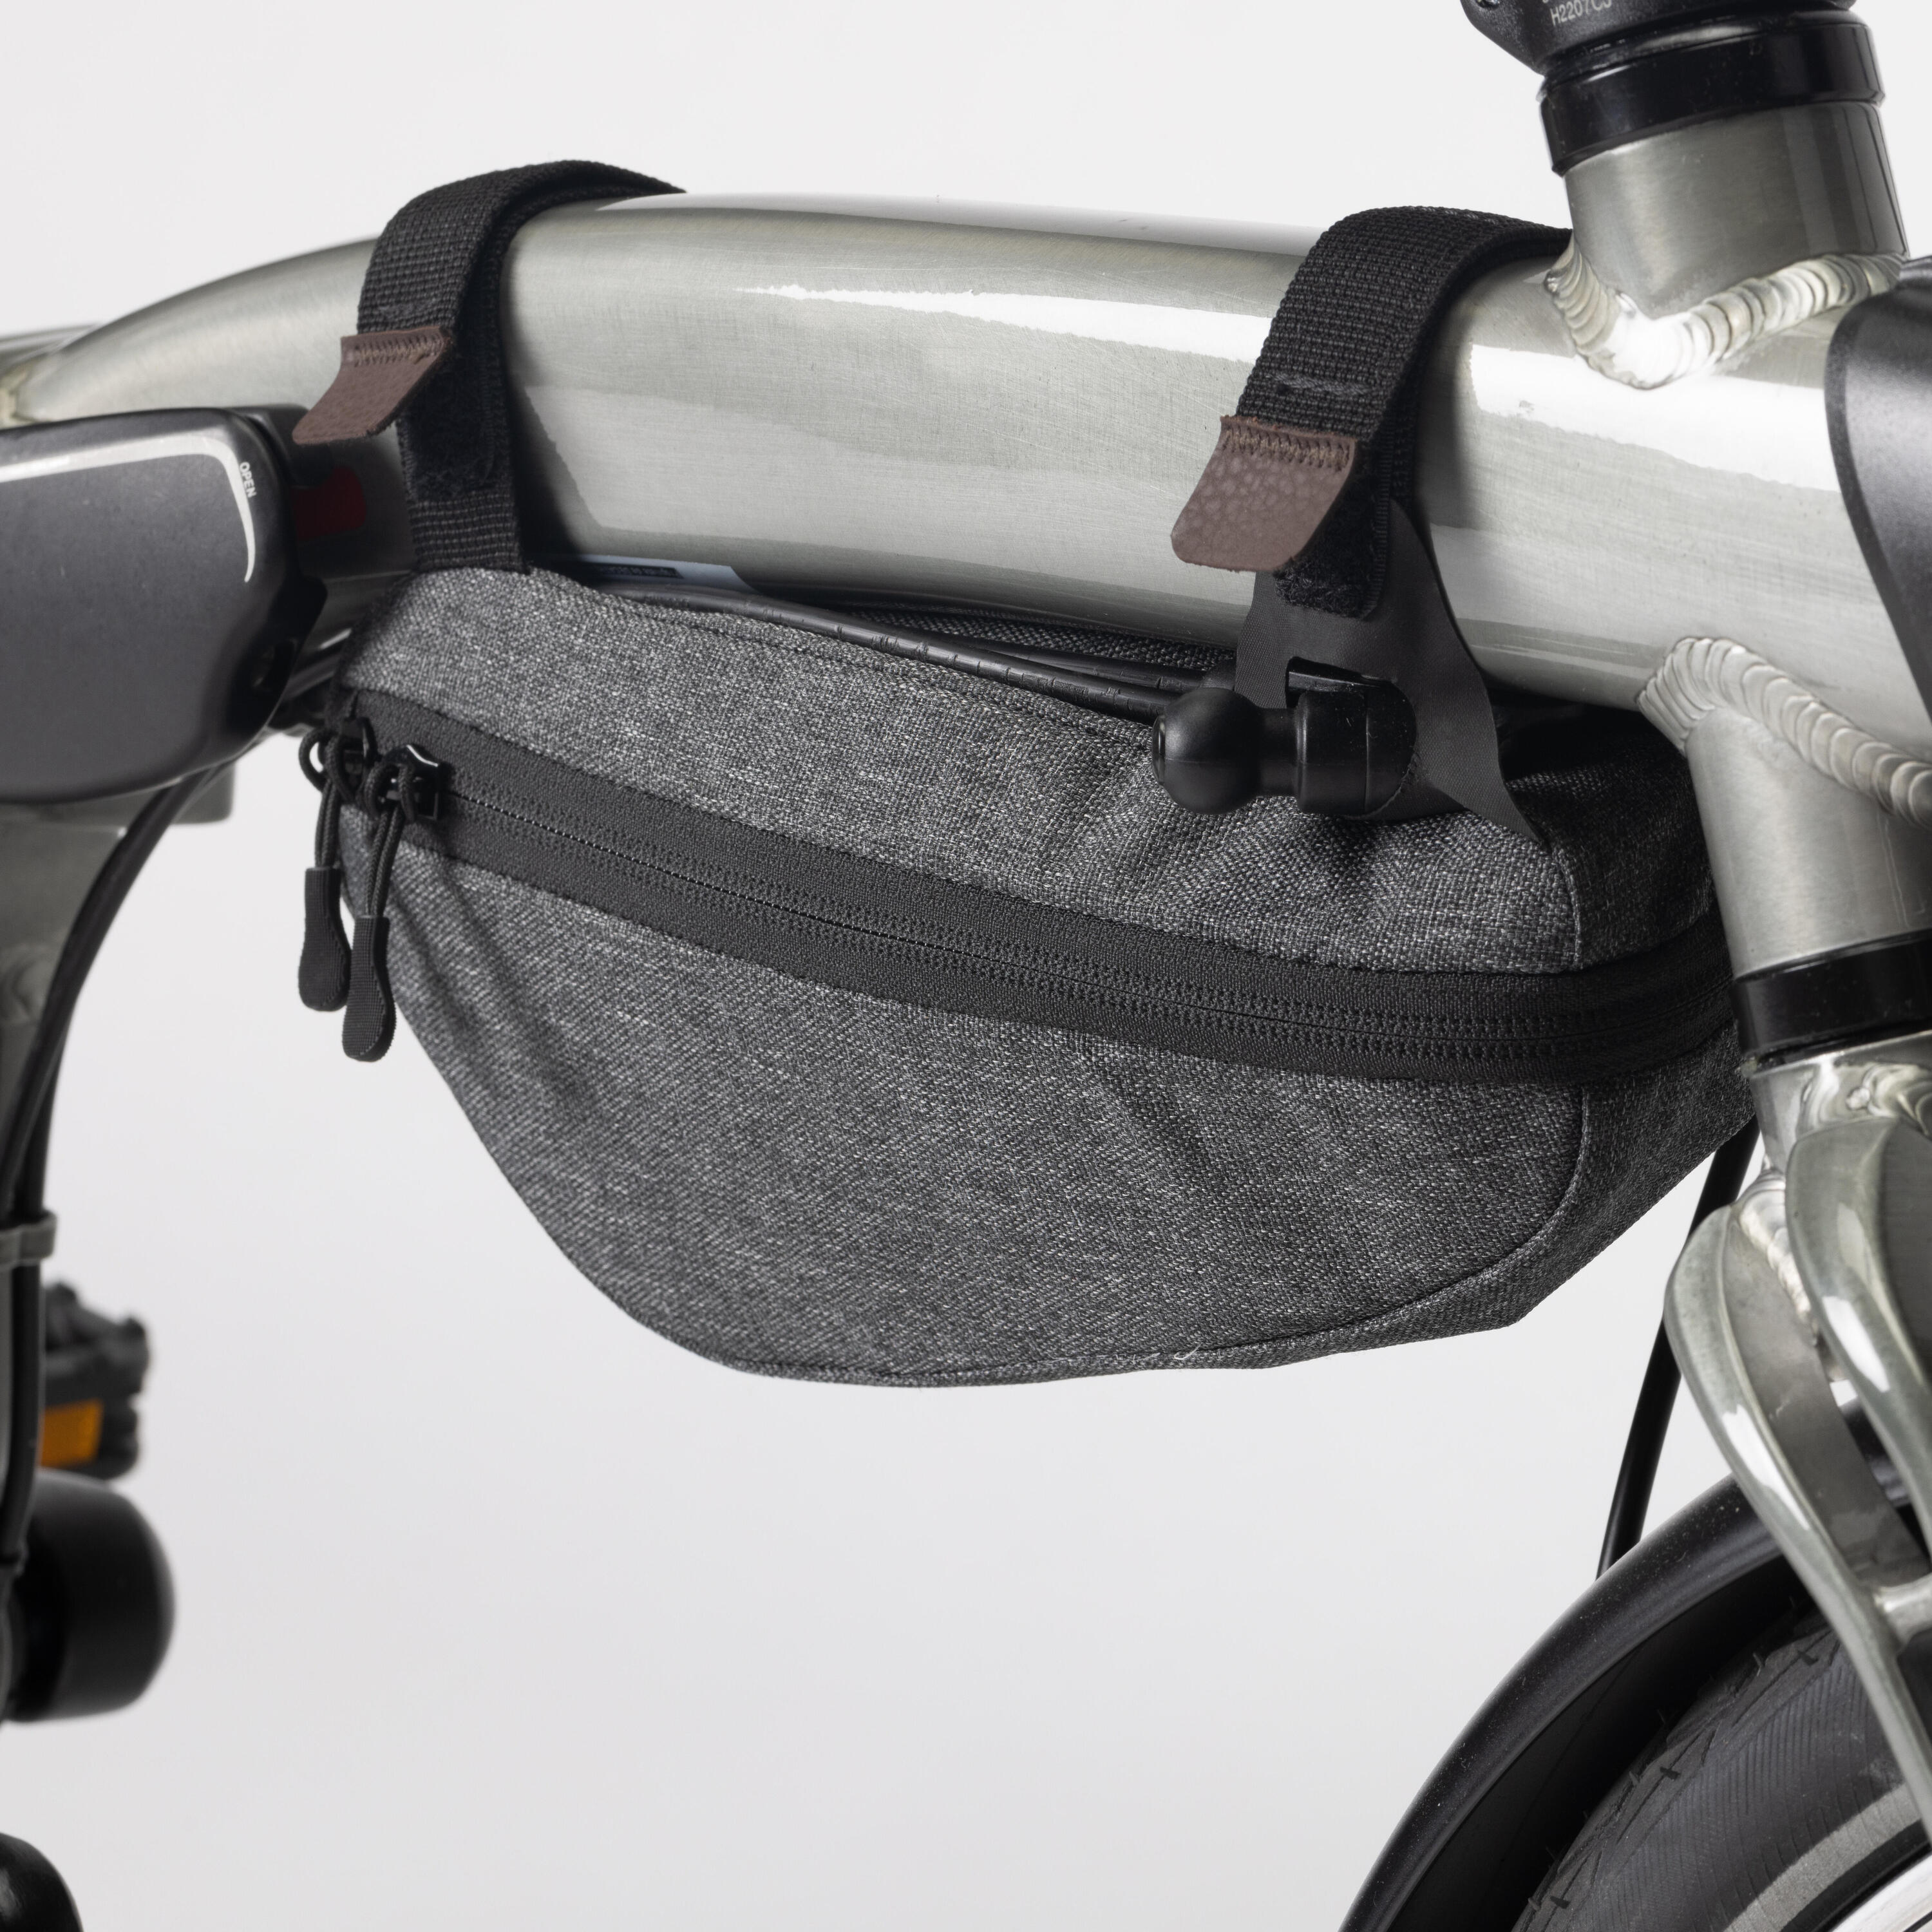 Protective Cover + Bag for 16" Folding Bikes 3/9